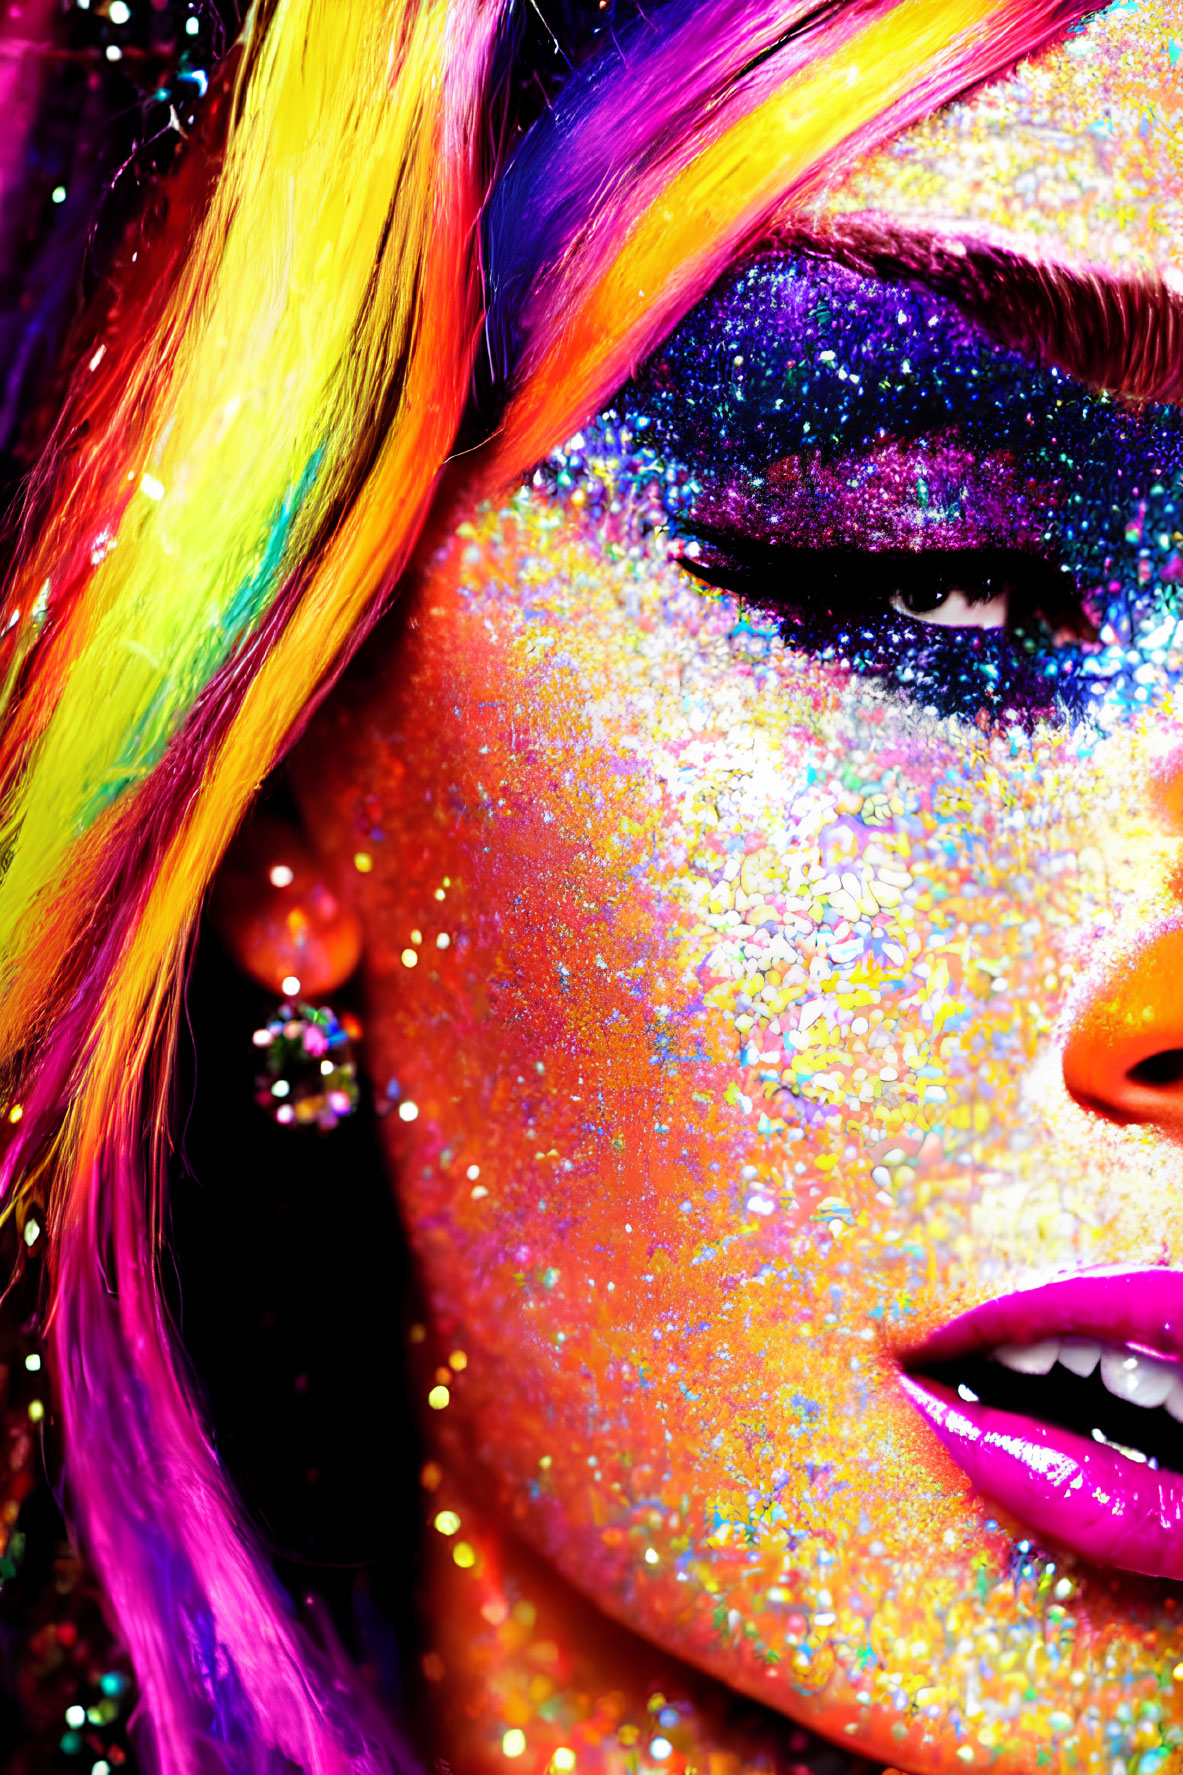 Colorful Close-Up of Person with Rainbow Hair and Glittery Makeup